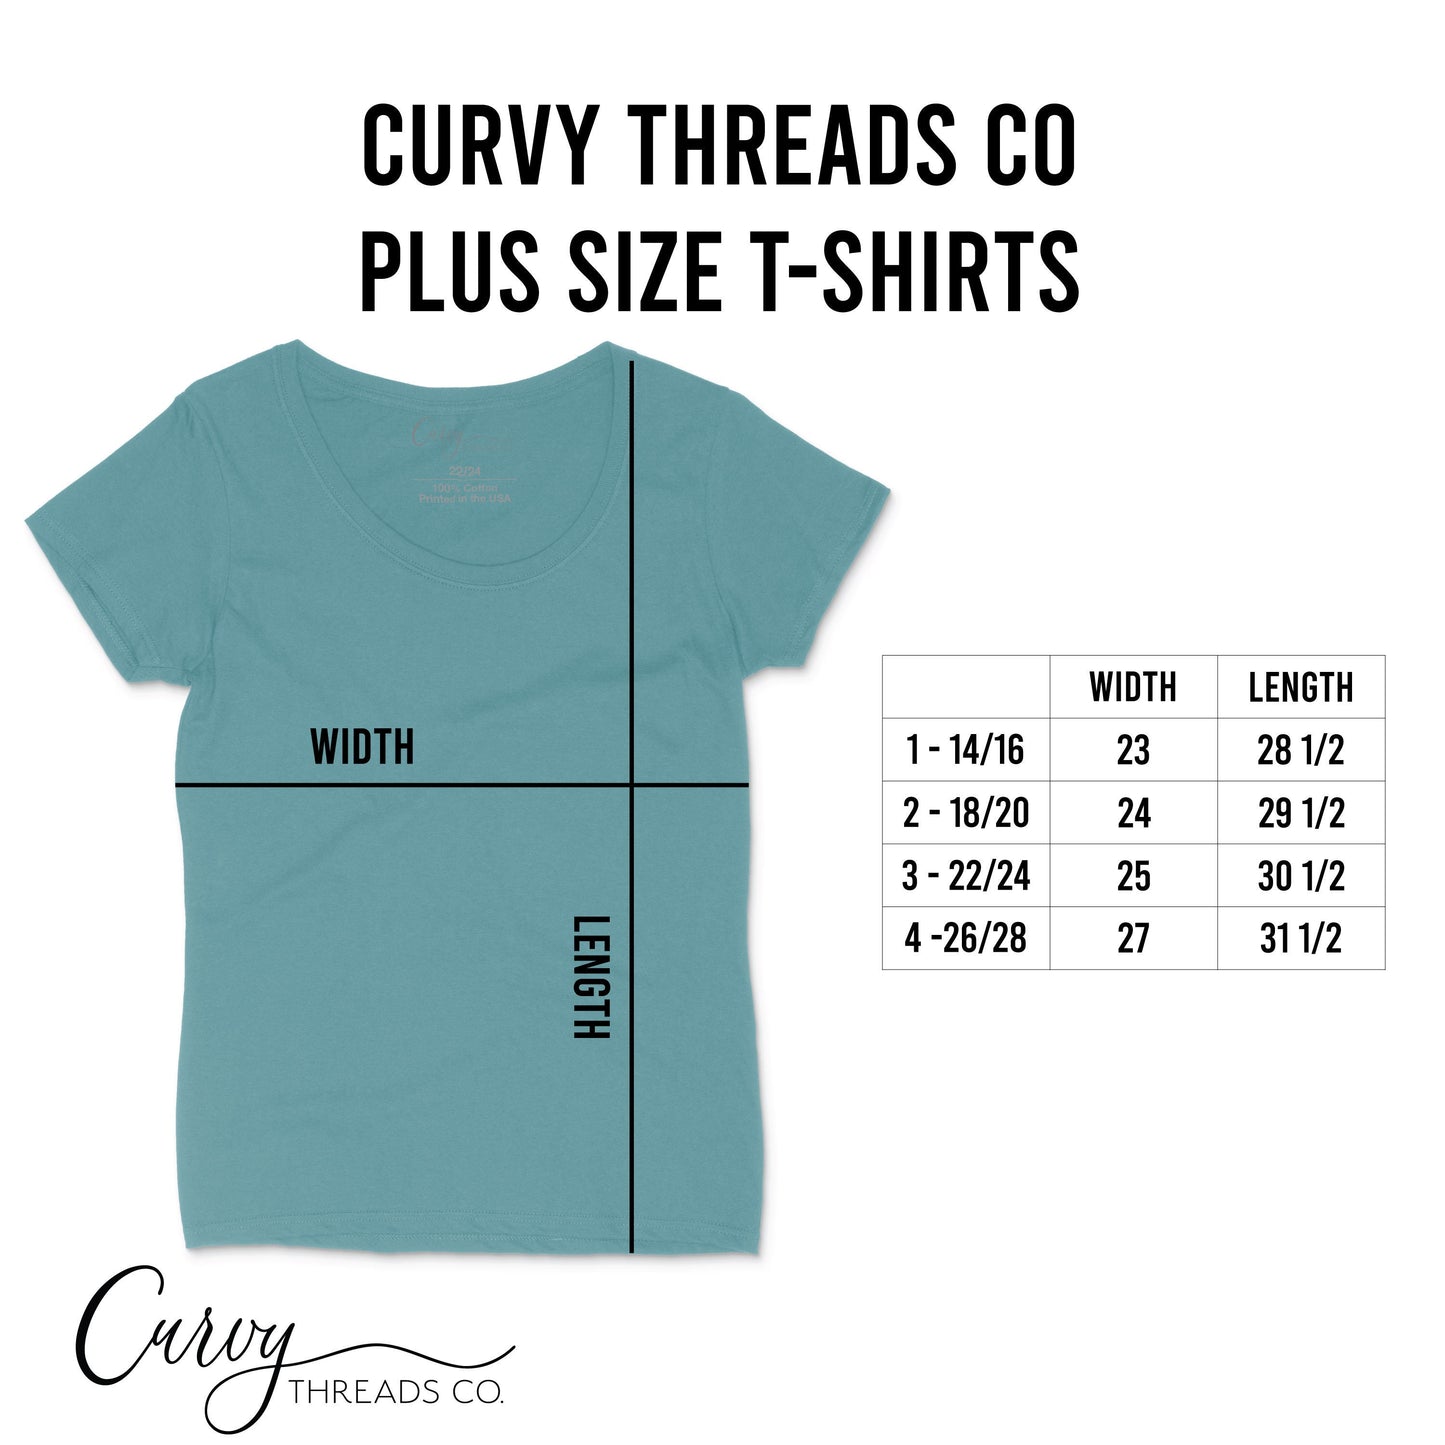 I May Look Like I'm Doing Nothing But In My Head I'm Quite Busy | Ladies Plus Size T-Shirt | Curvy Collection | Funny T-Shirt